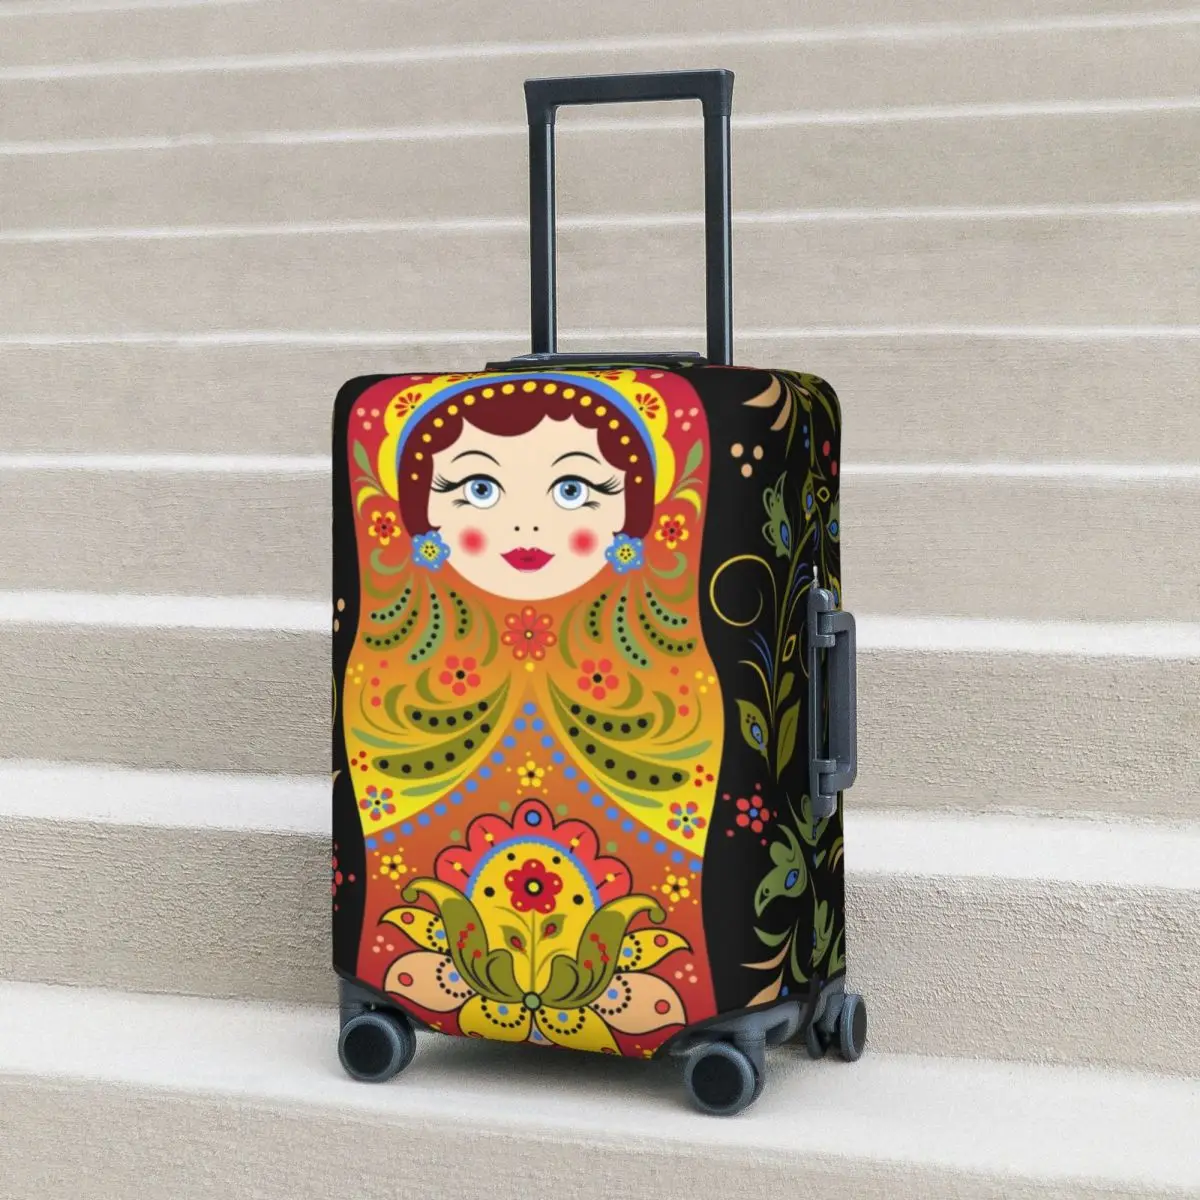 

Russian Doll Suitcase Cover russian doll matryoshka Vacation Cruise Trip Practical Luggage Accesories Protector